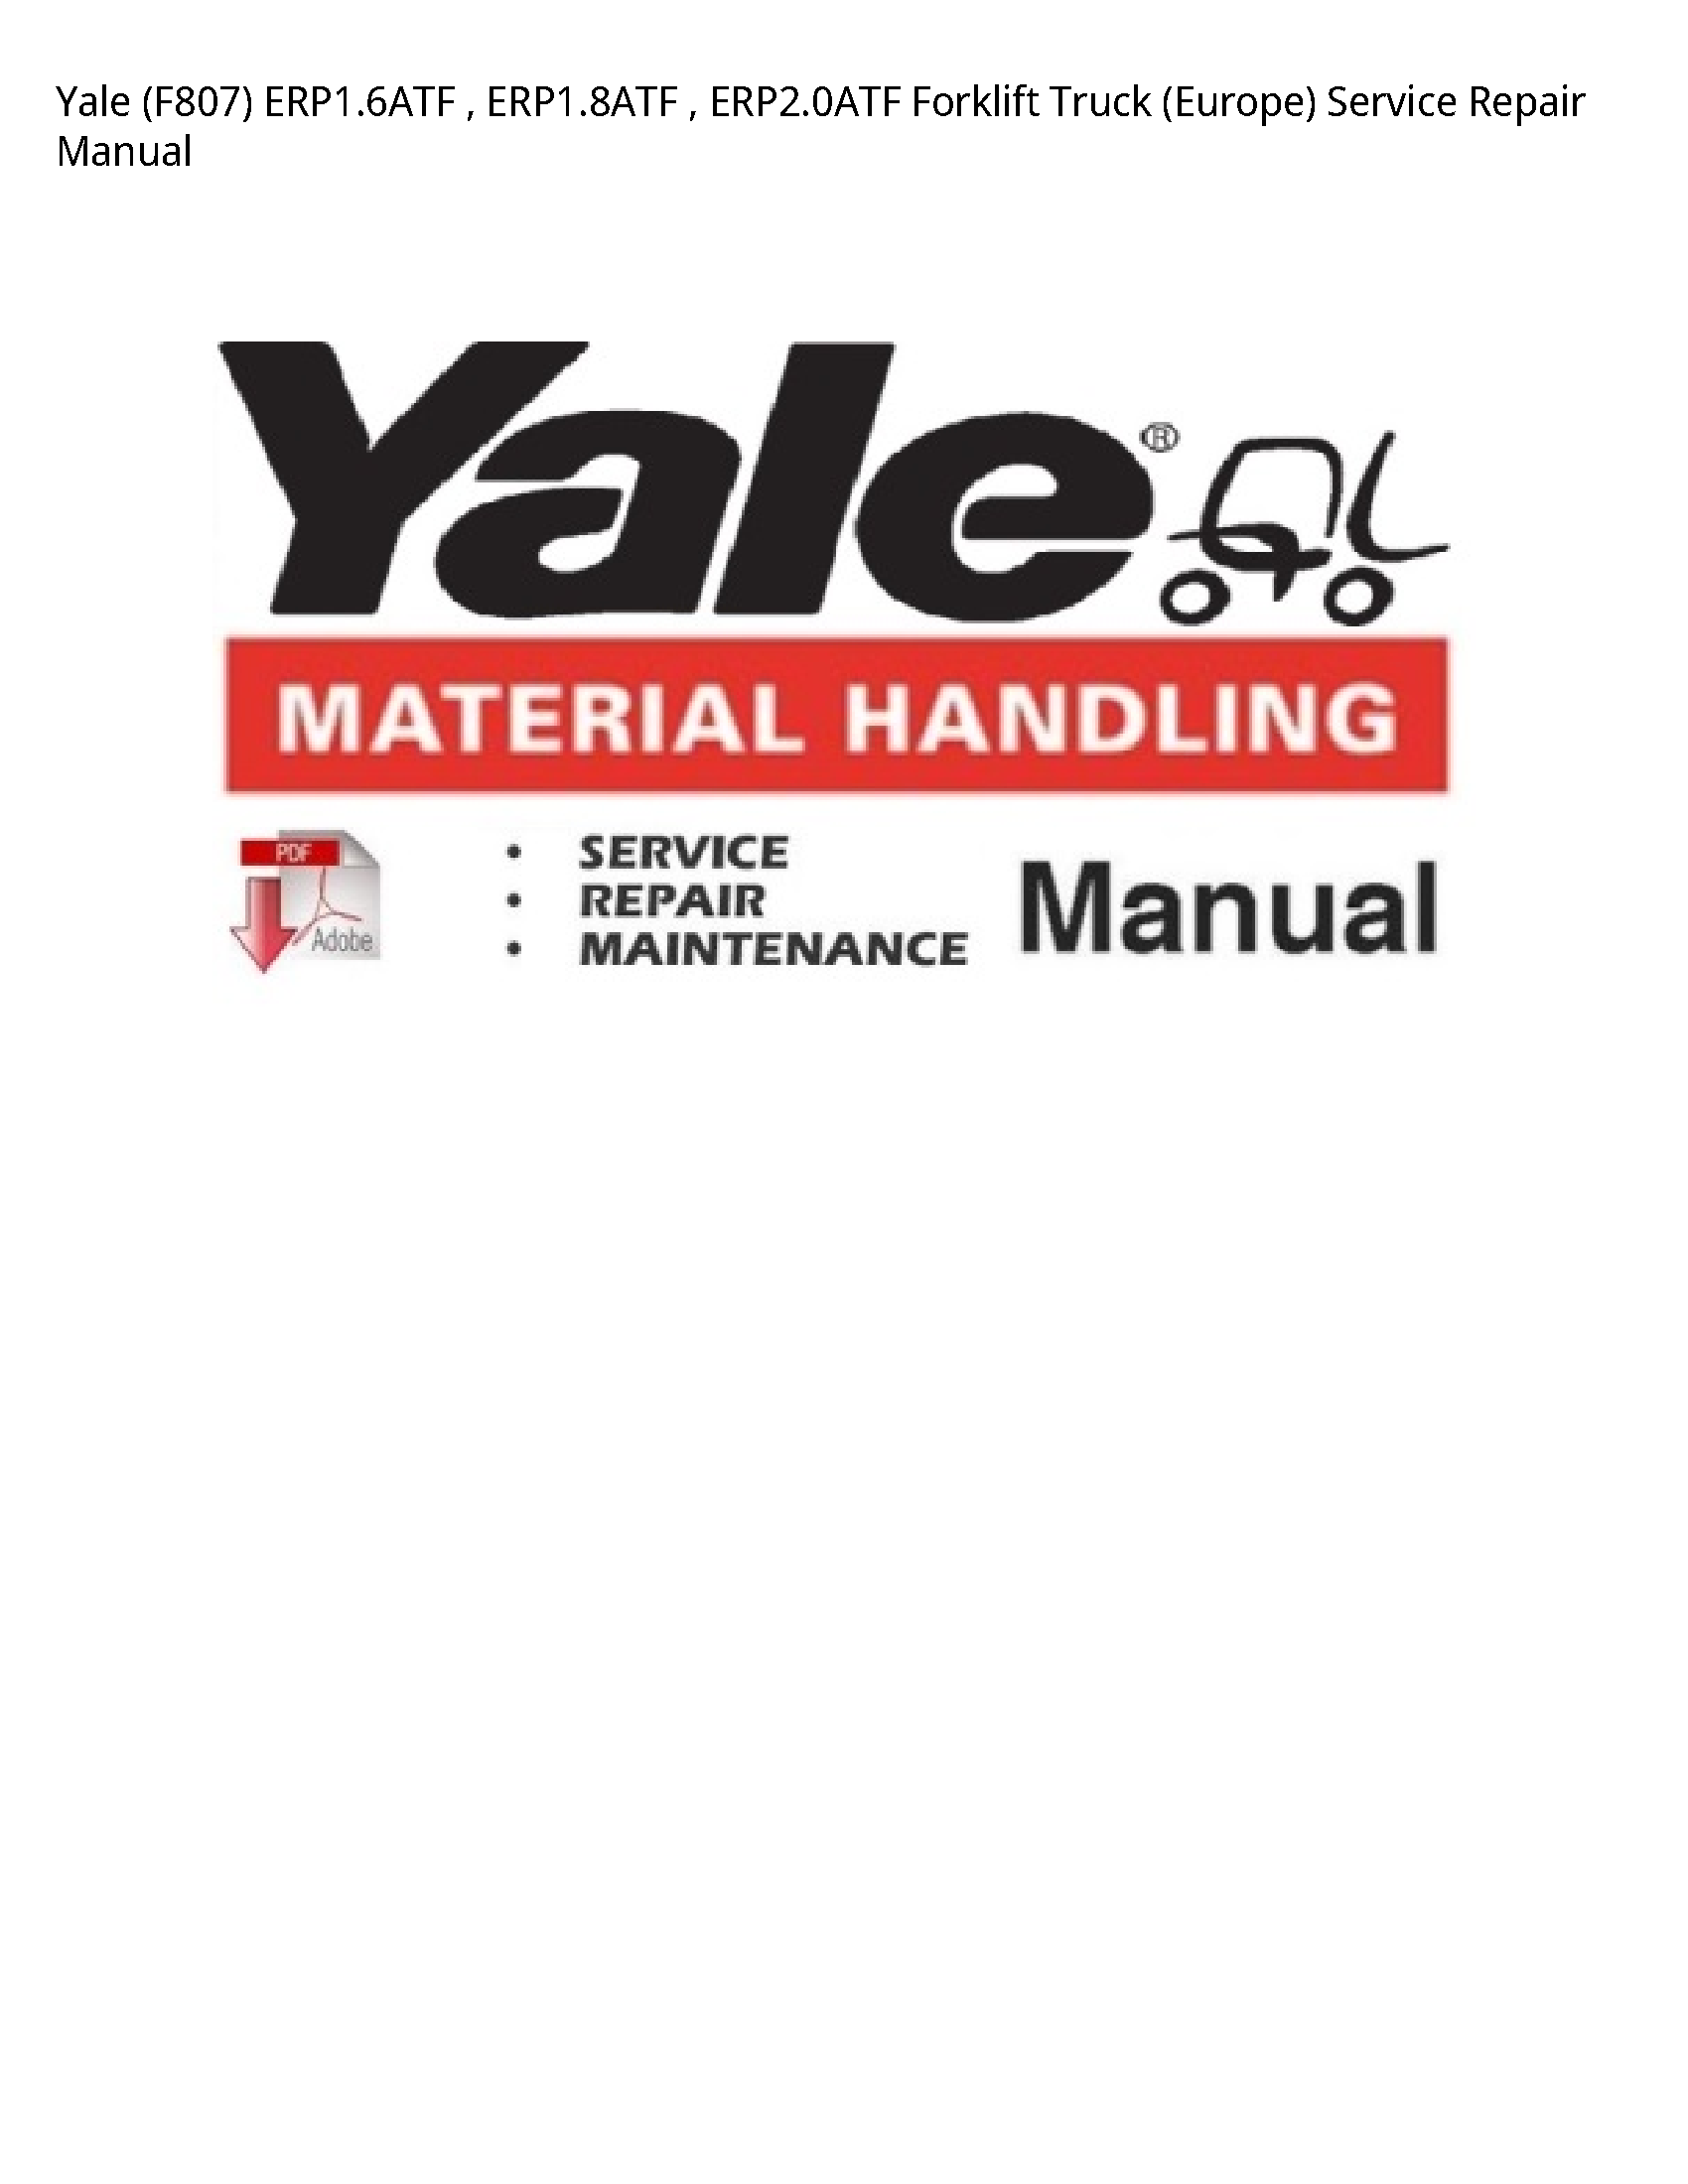 Yale (F807) Forklift Truck (Europe) manual